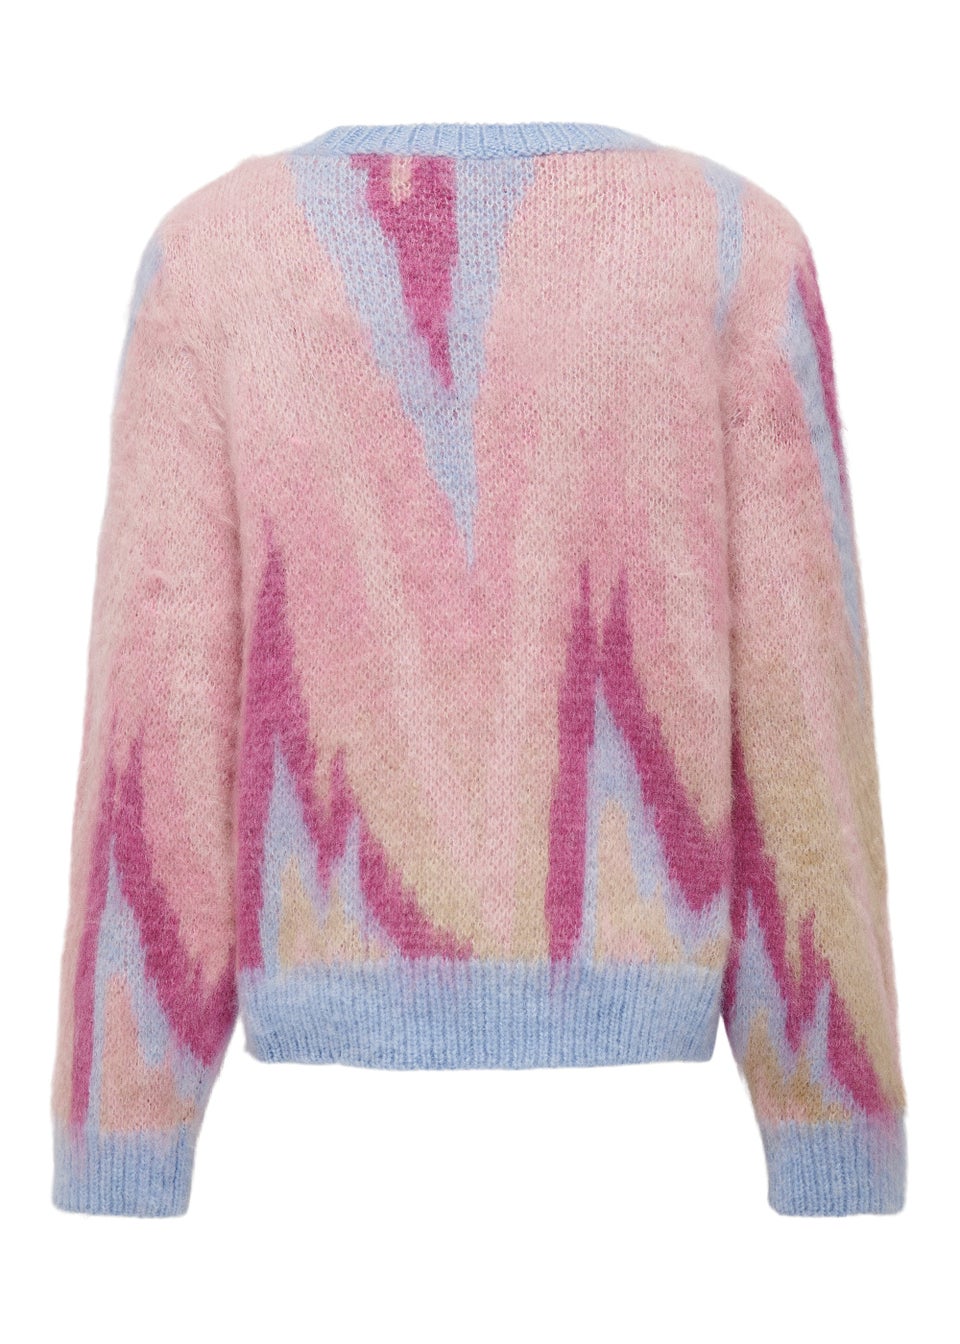 ONLY Kids Multicoloured Long Sleeve Knit Jumper (5-14yrs)